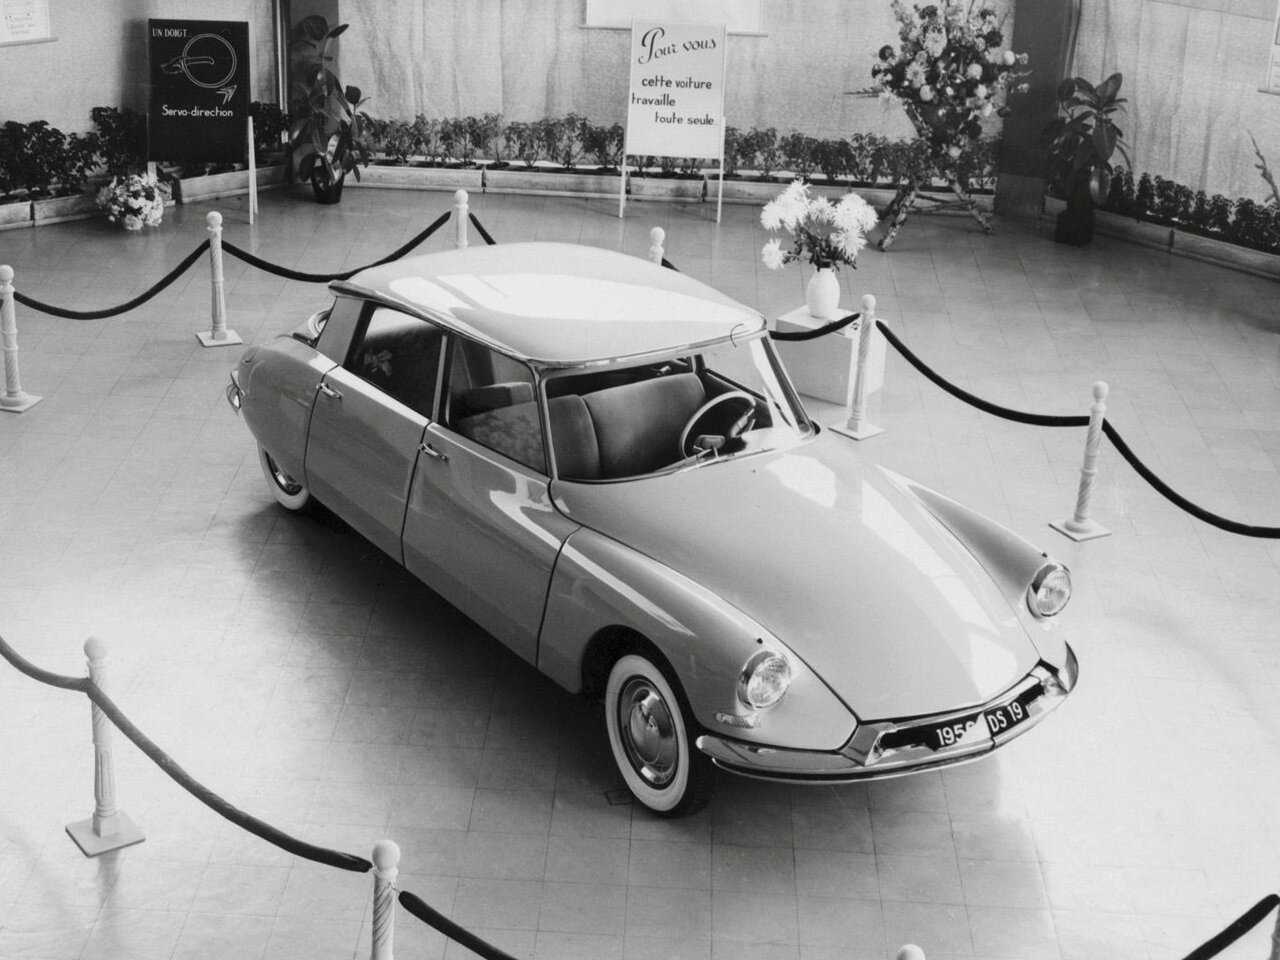 In 1955, the Citroen DS landed in the automotive scene like a UFO from outer space.